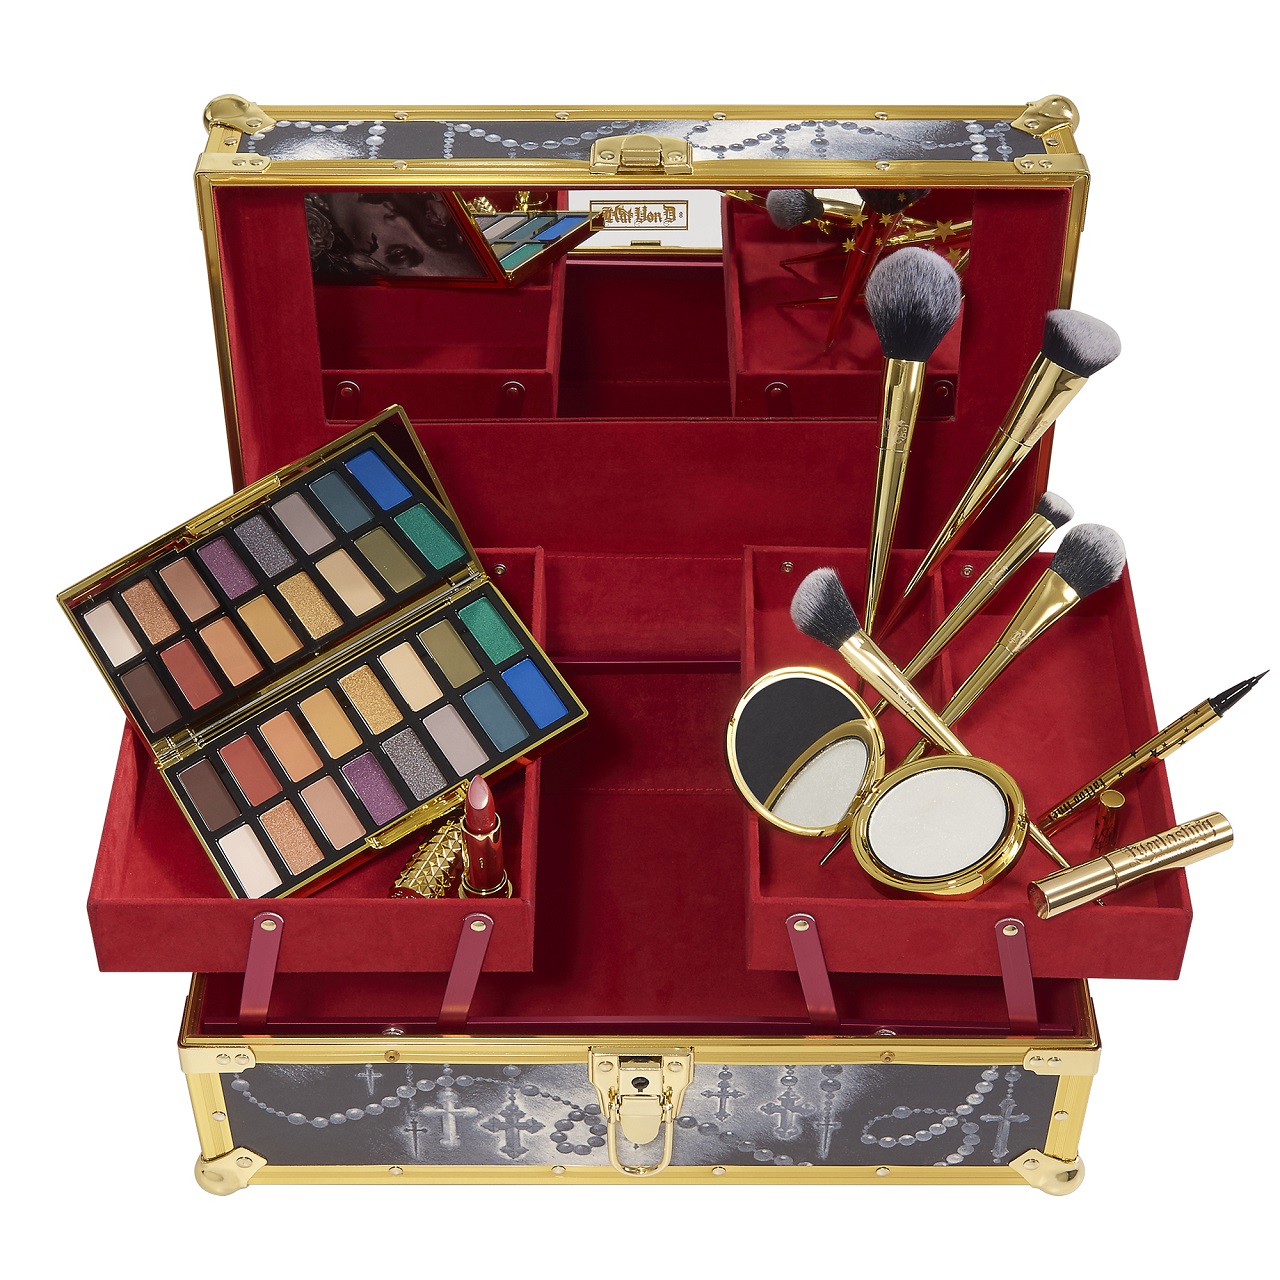 Kat Von D Beauty Celebrates Its 10th Anniversary With An 8-Piece Gilded, Limited Edition Collection (Out Now!)-Pamper.my